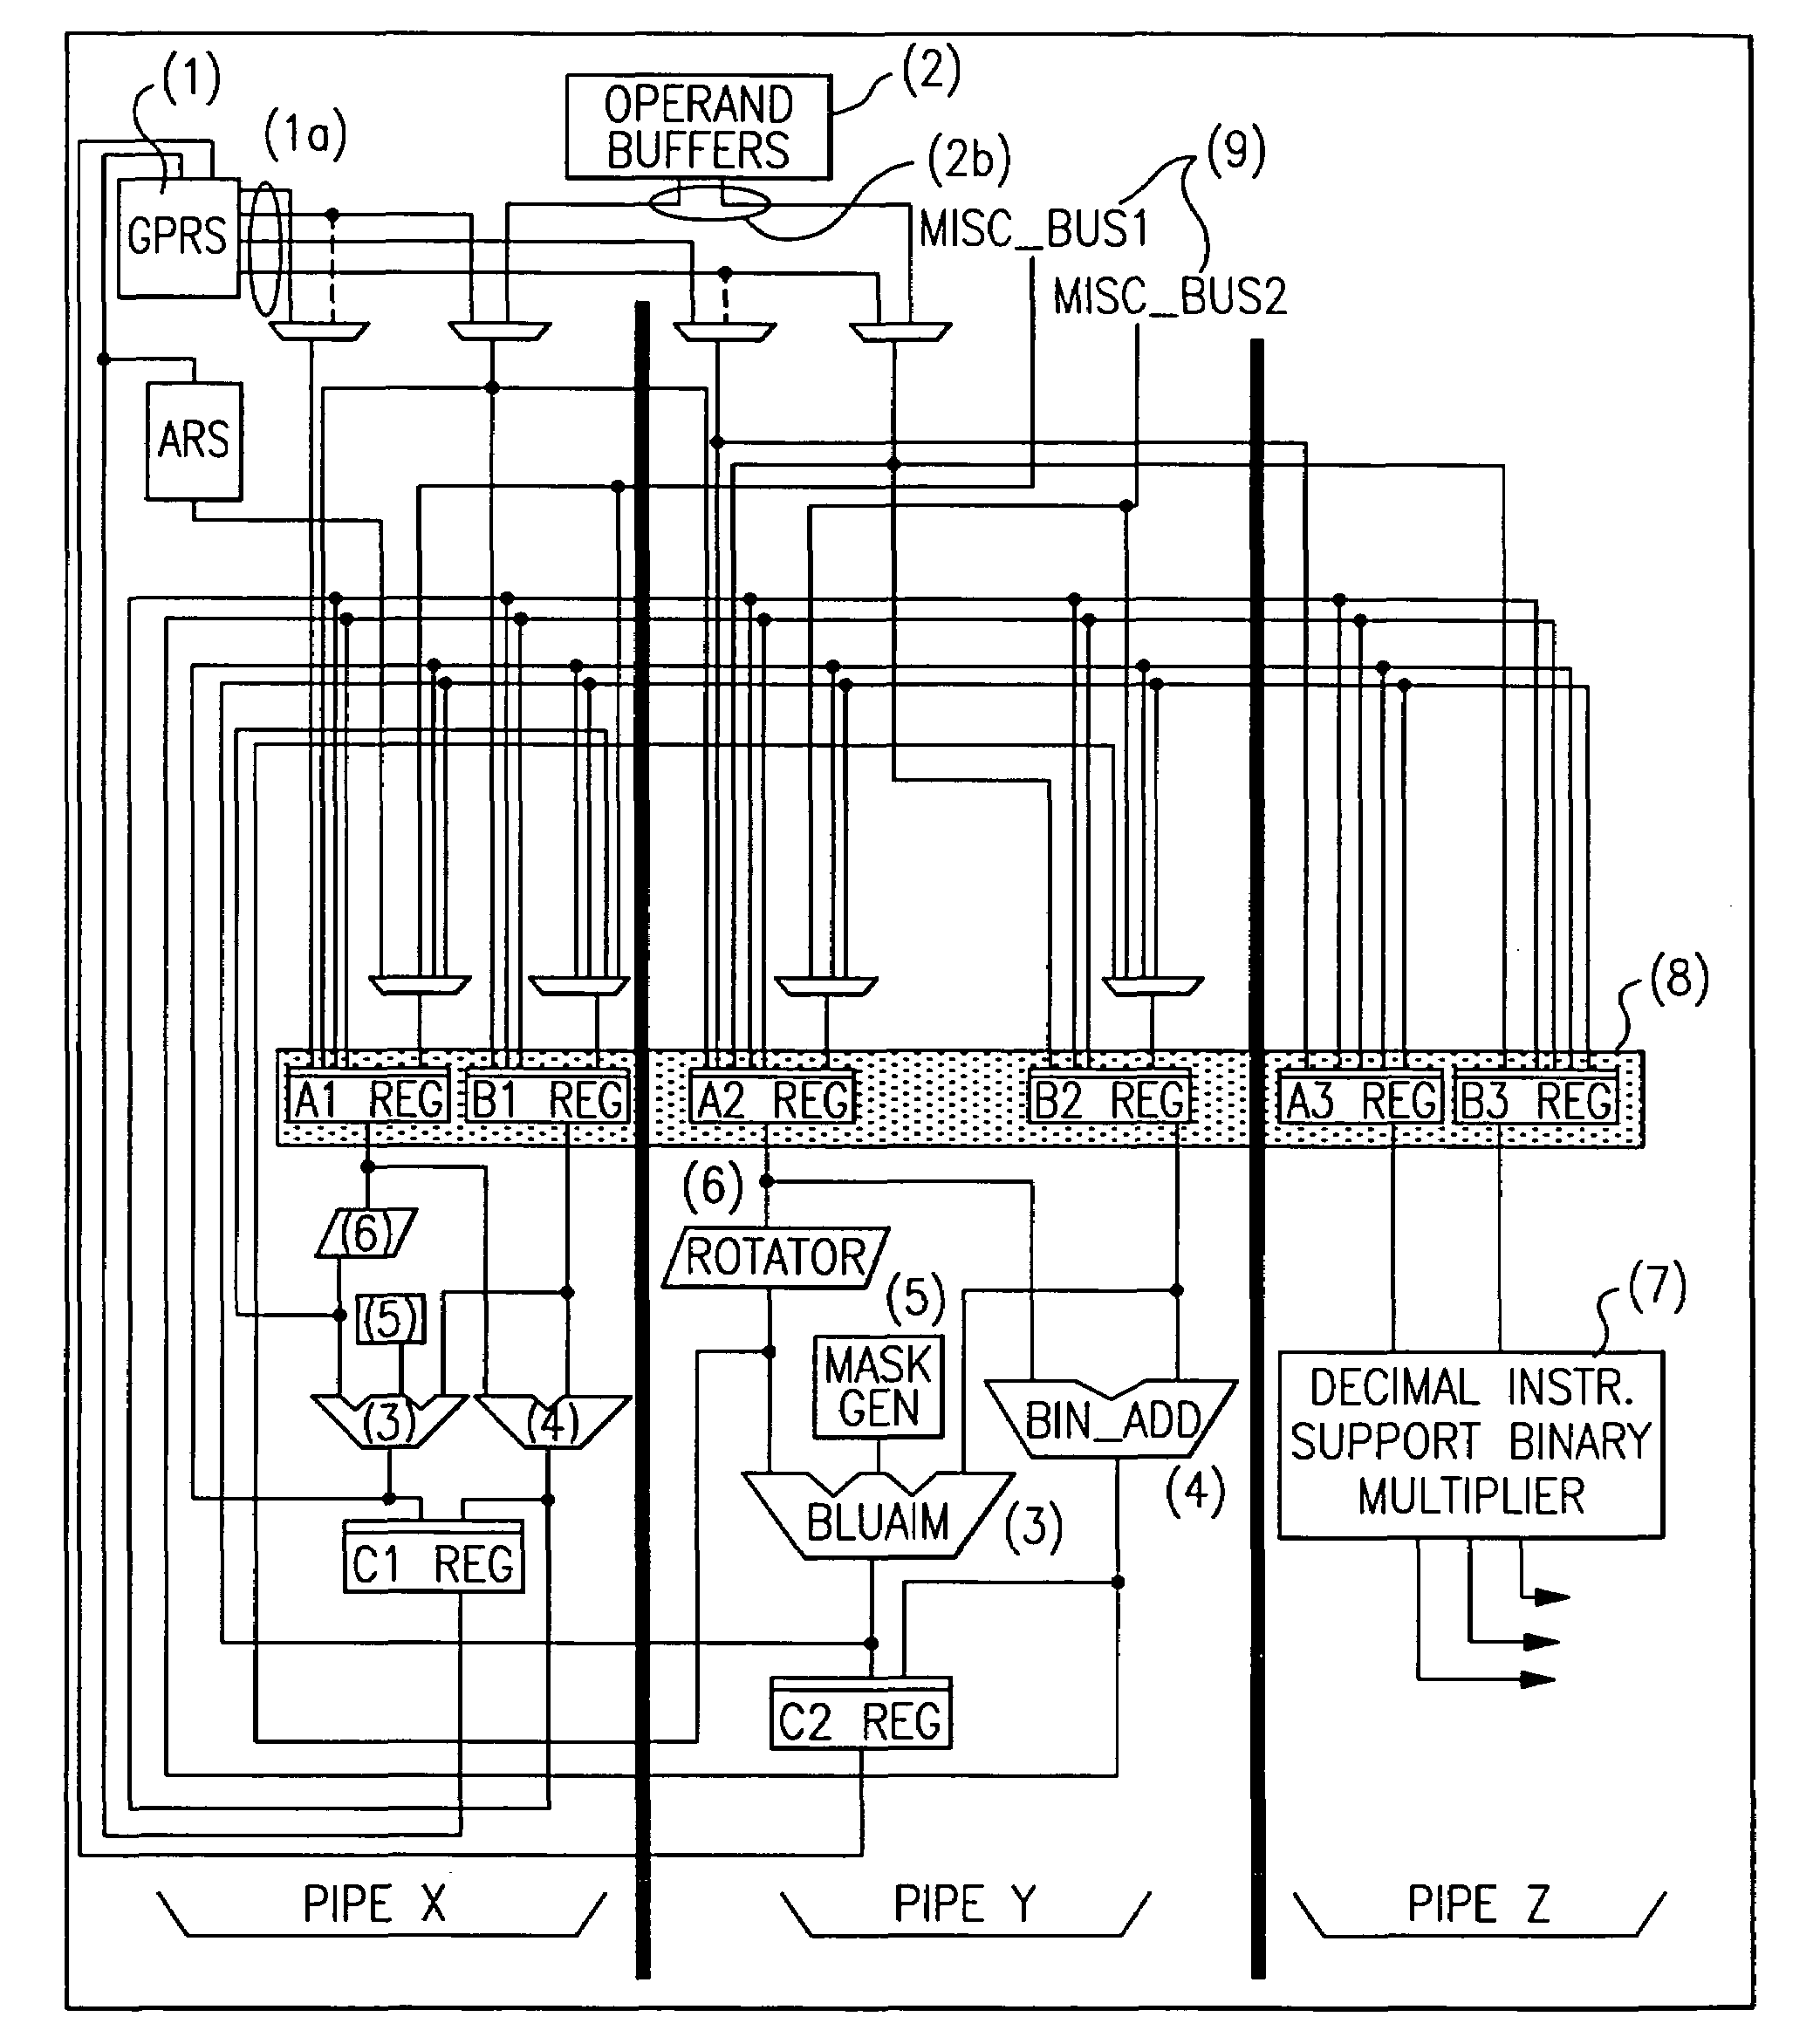 Multi-pipe dispatch and execution of complex instructions in a superscalar processor